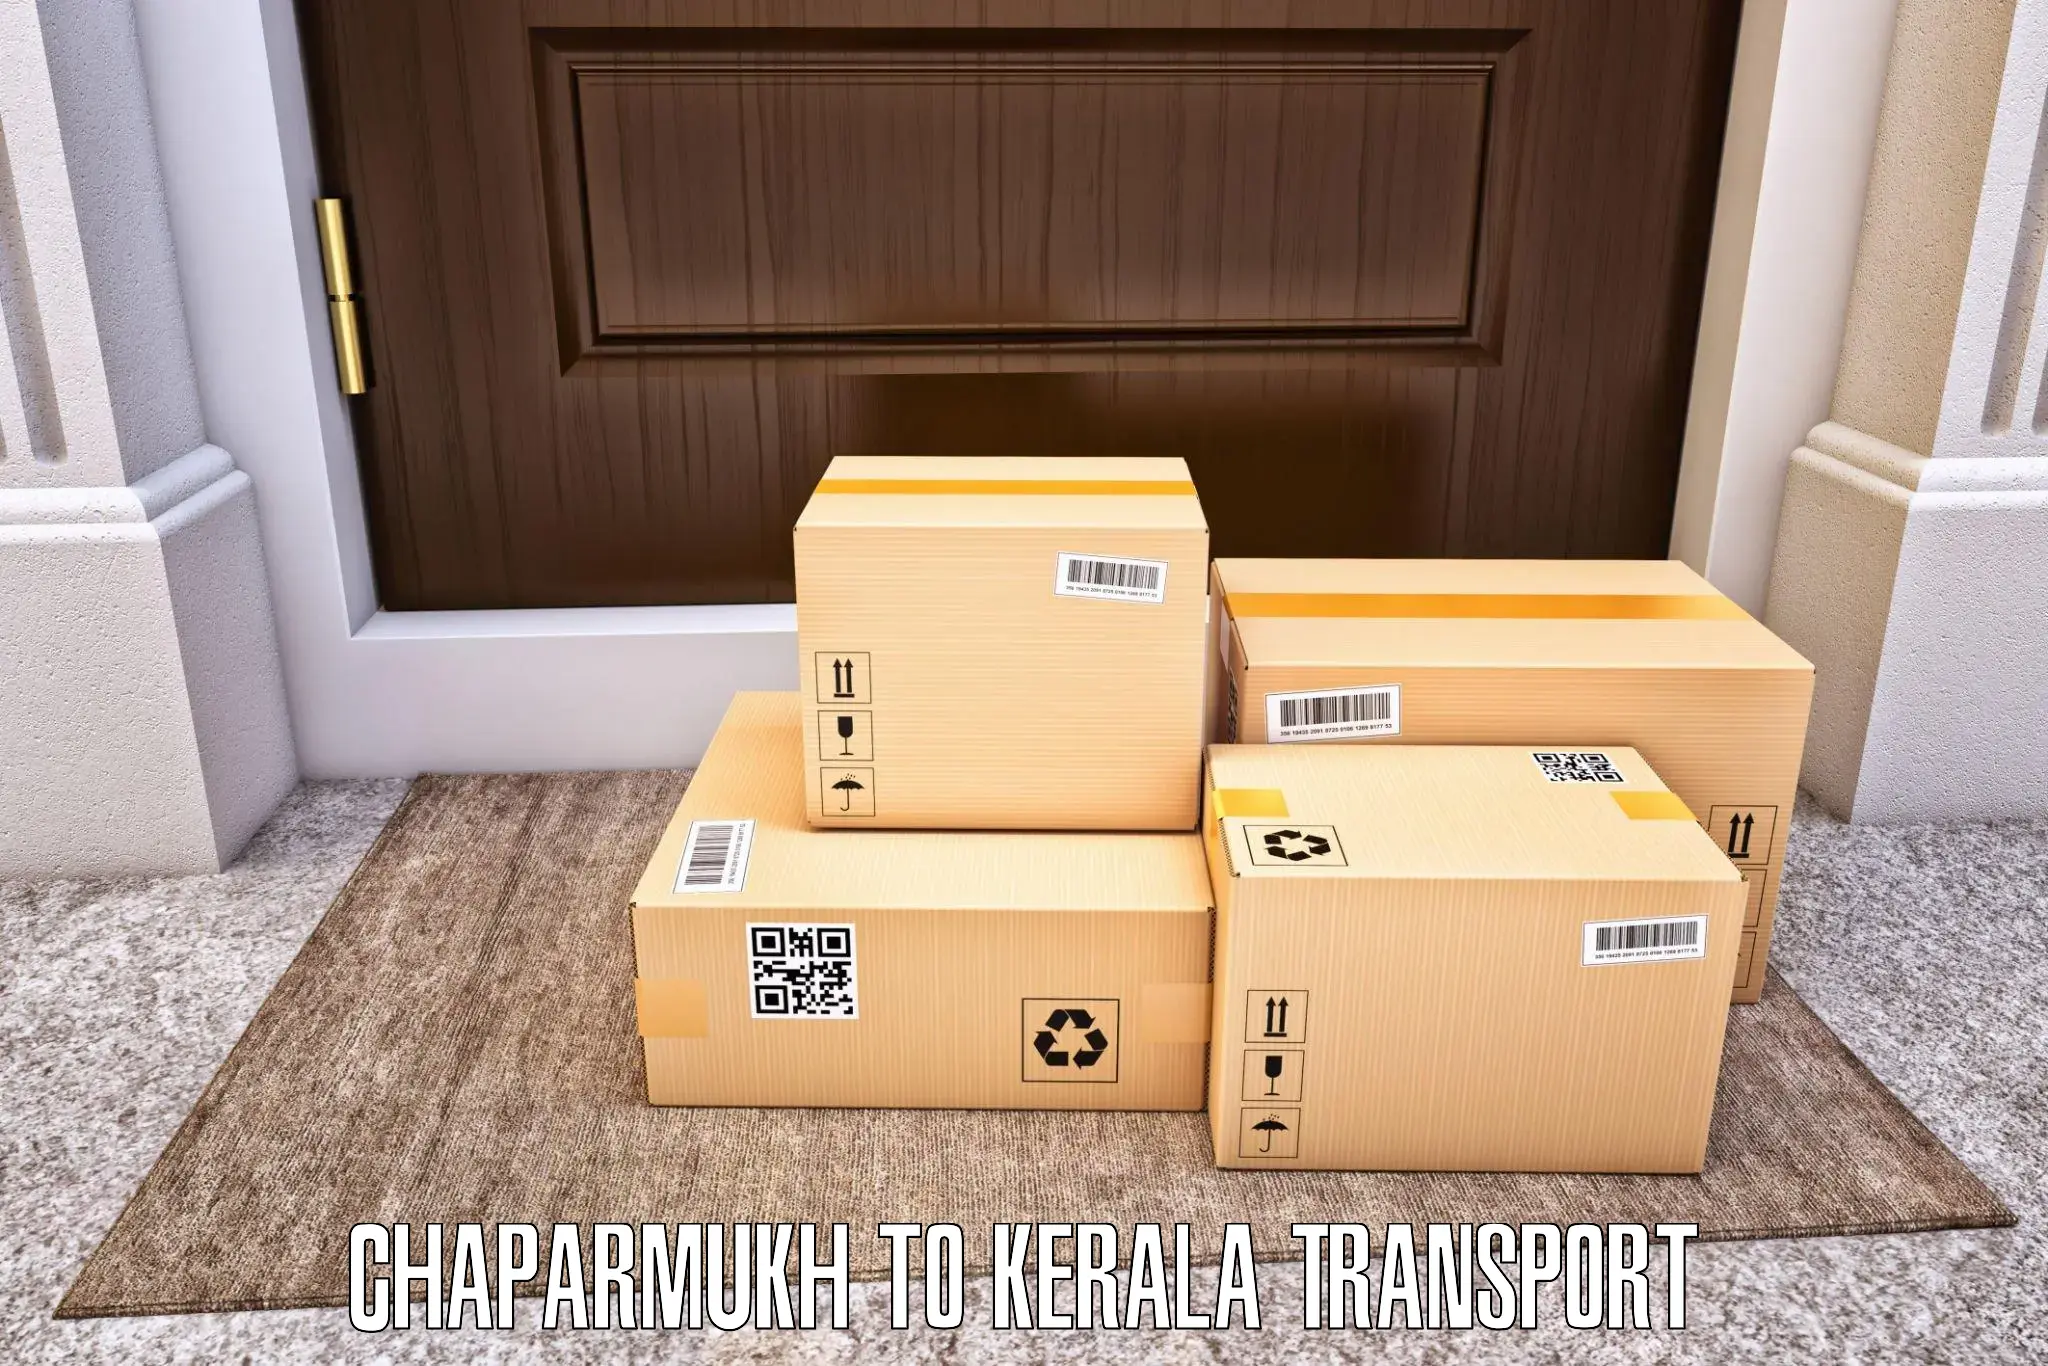 Land transport services Chaparmukh to Edappal